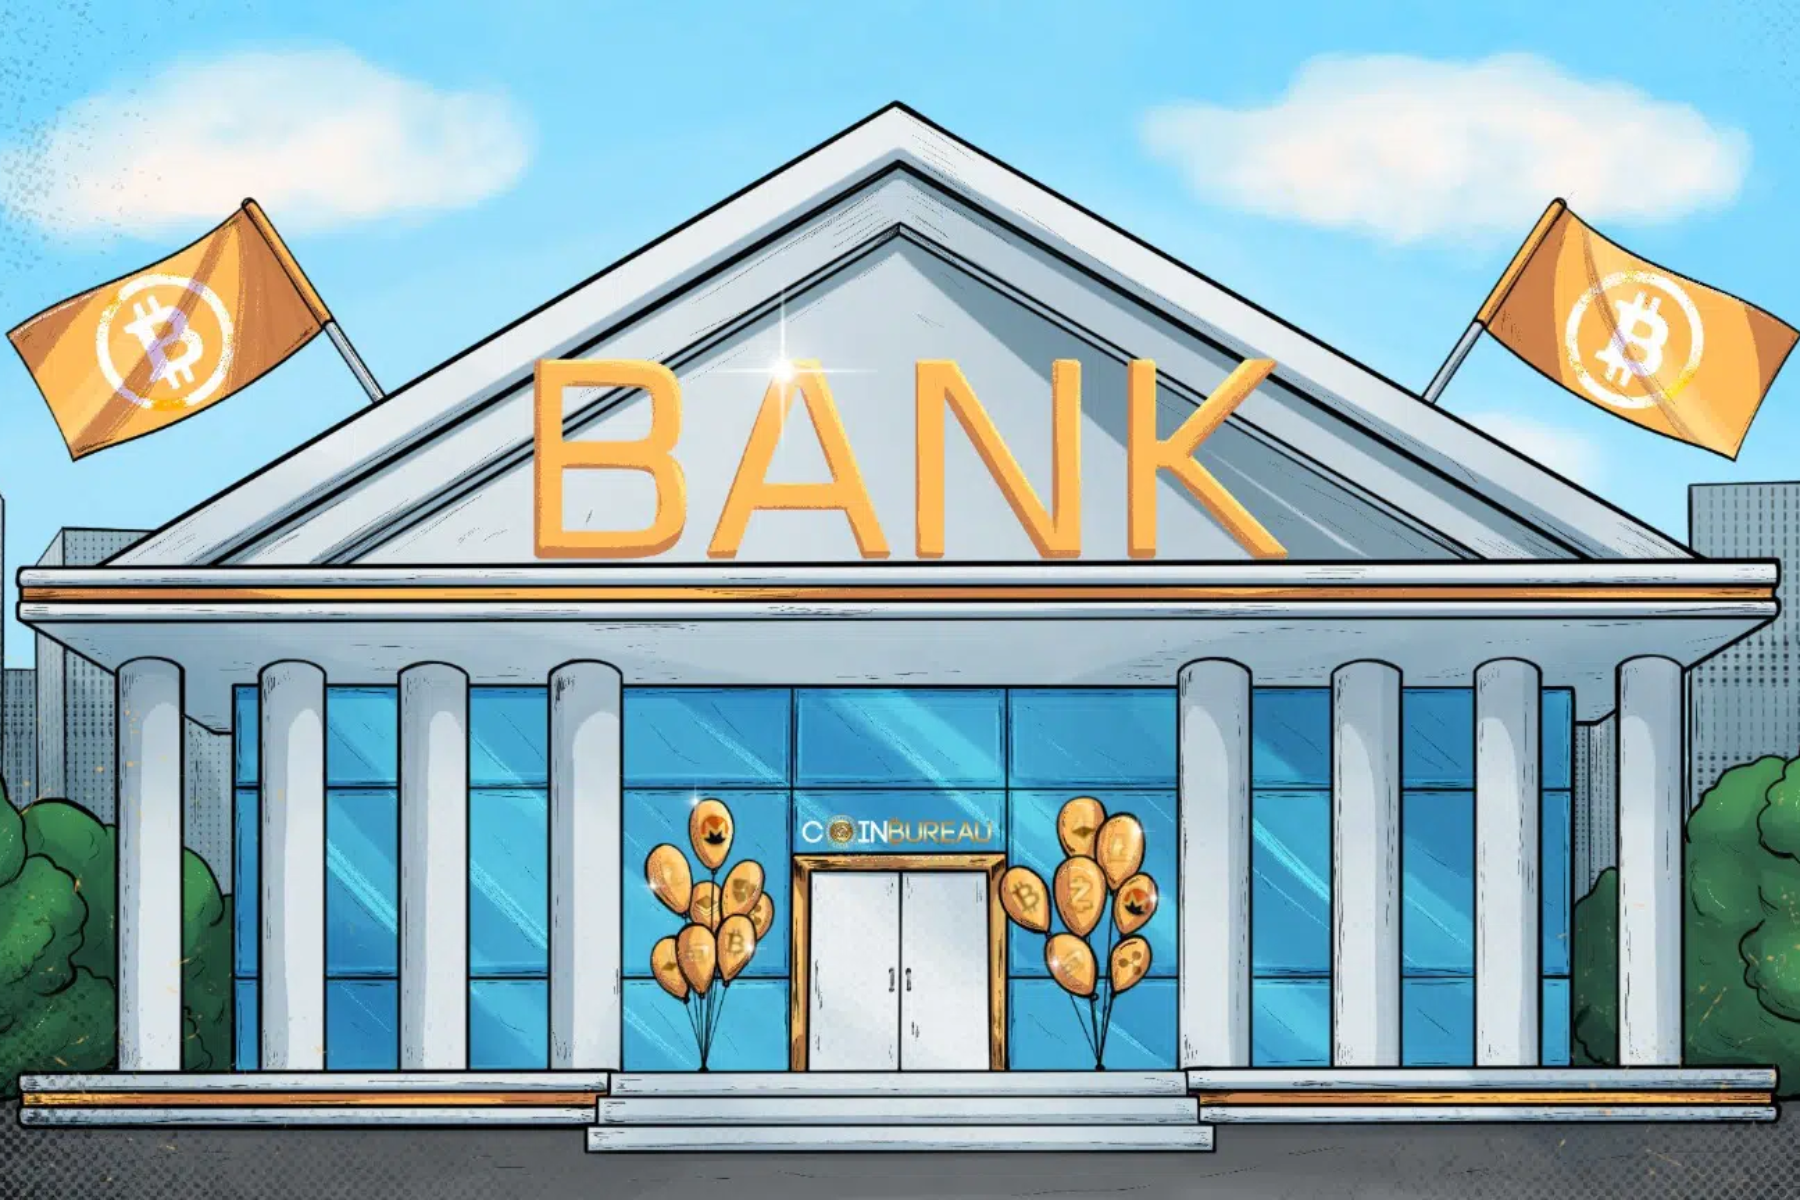 A crypto bank with two golden flags bearing the bitcoin logo and balloons bearing different currency logos